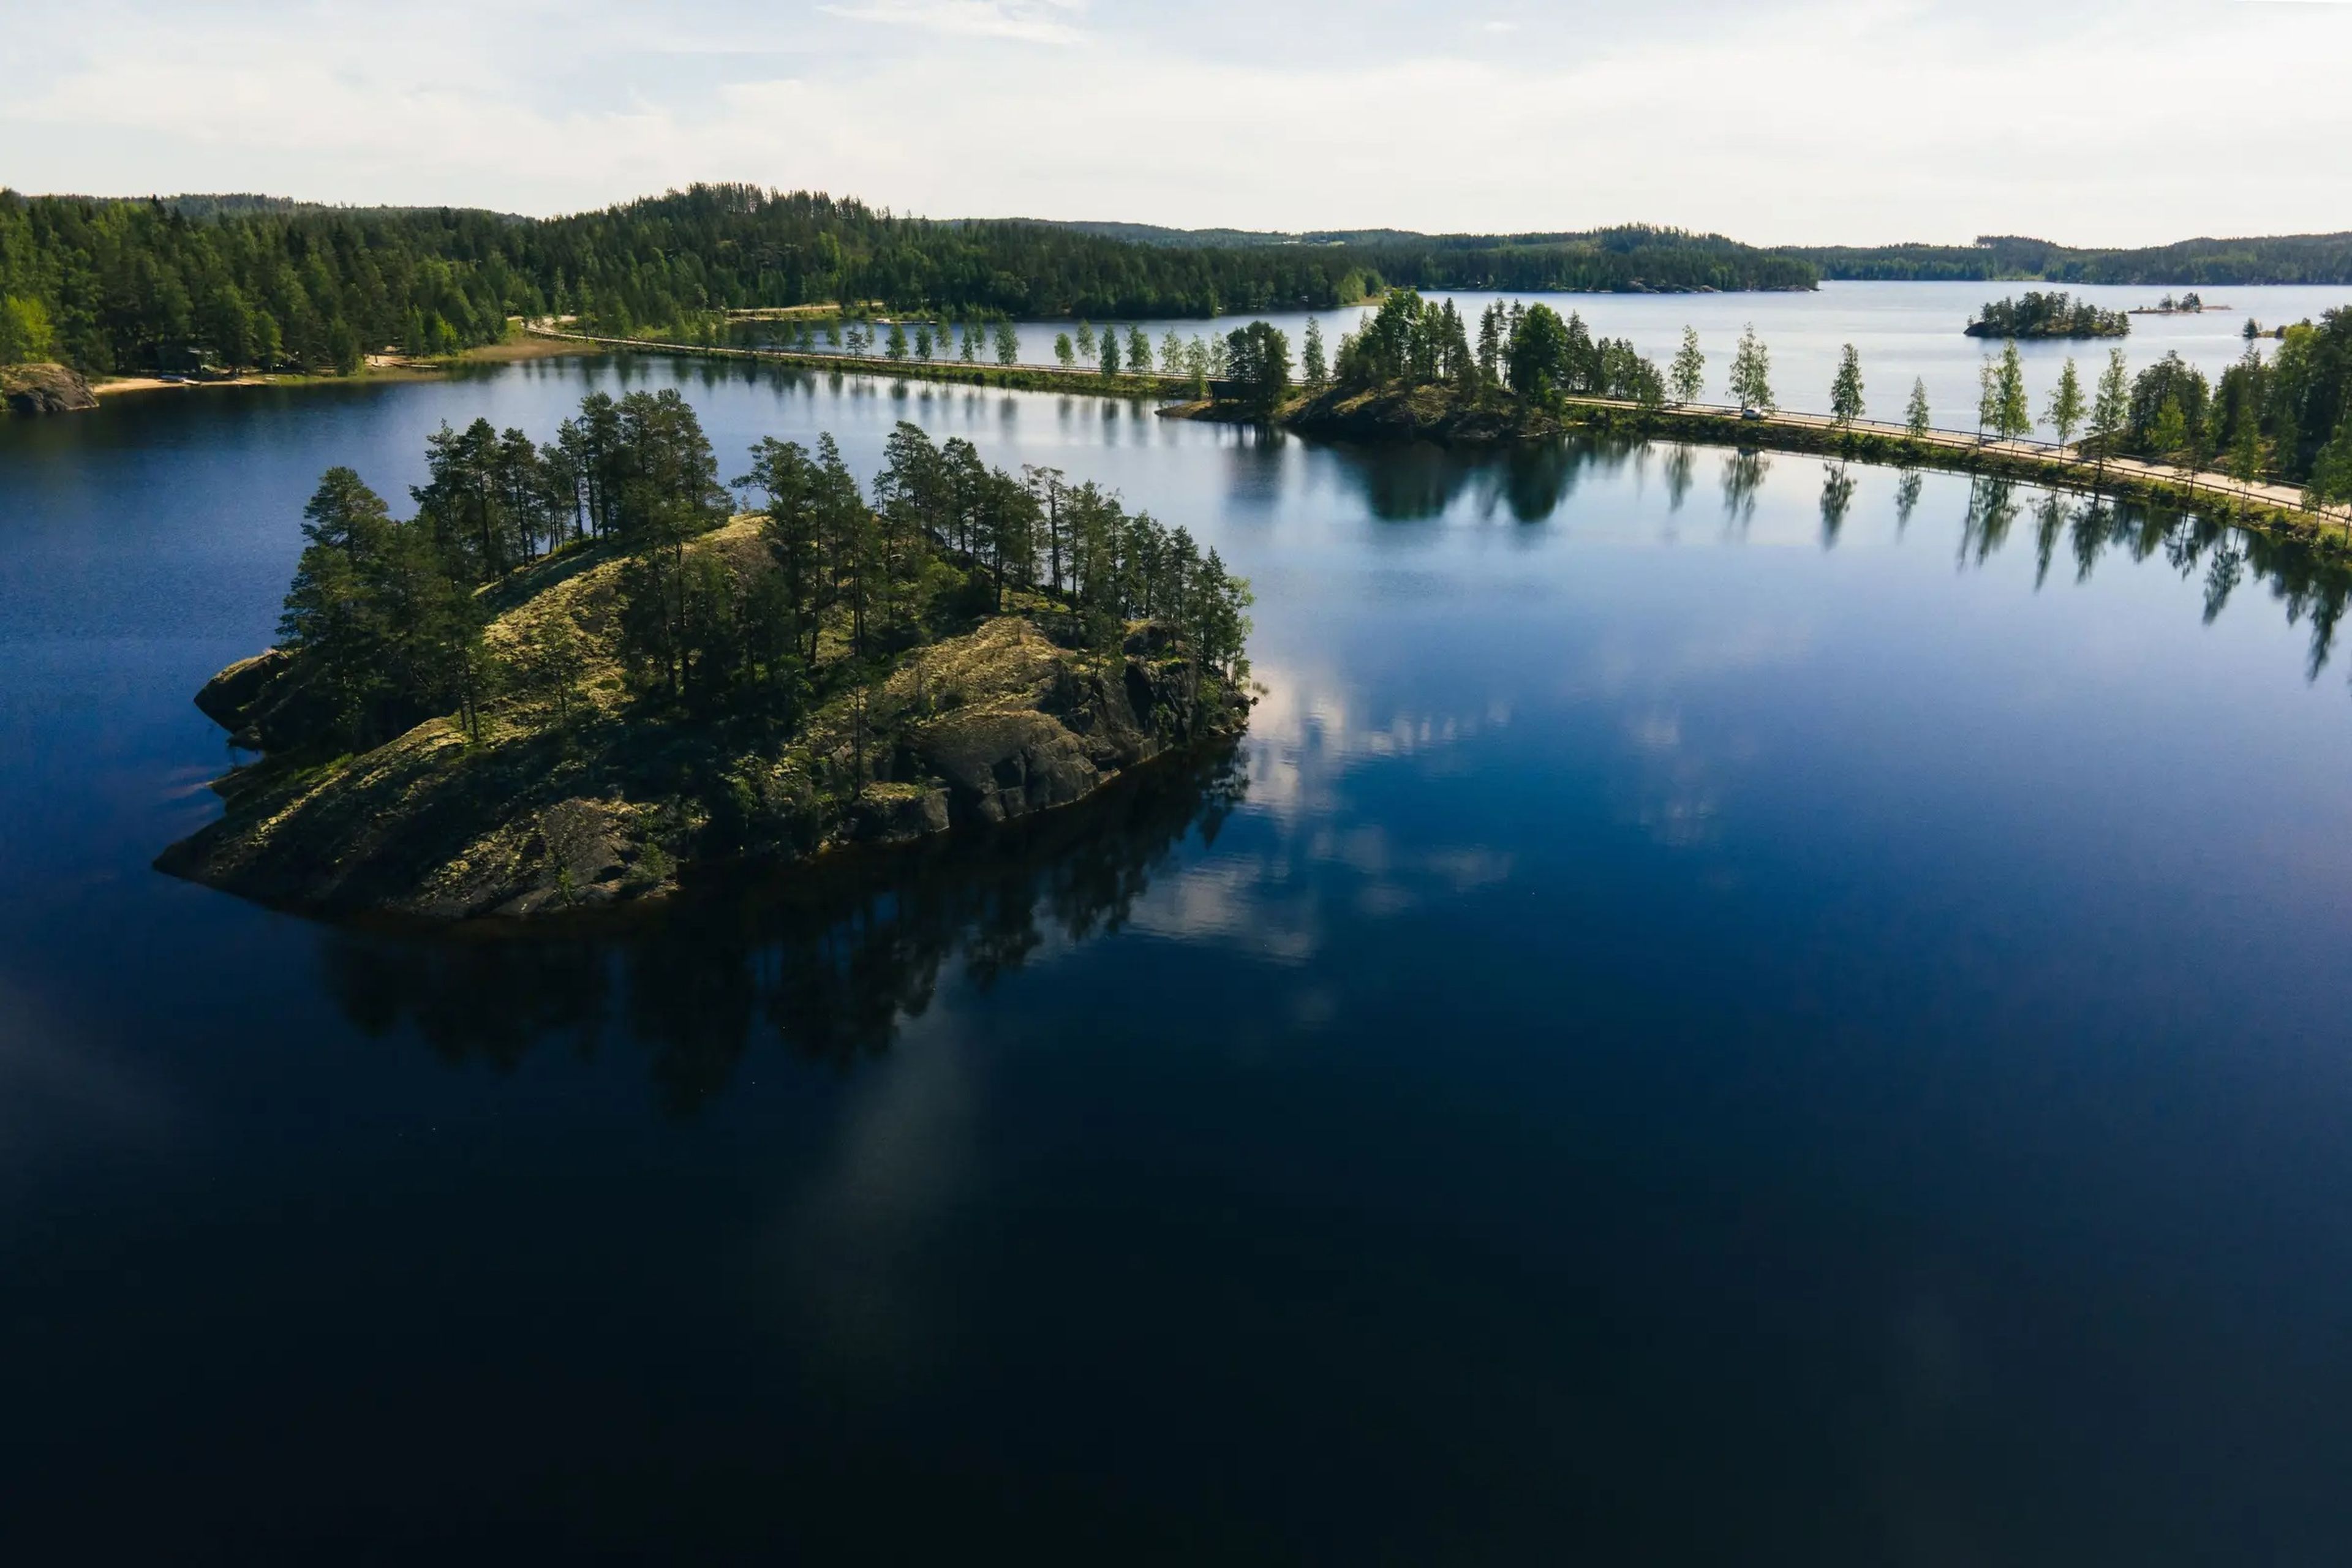 An aerial view across the reflective surface of Lake Saimaa in Puumala, Finland, which is ringed by trees.